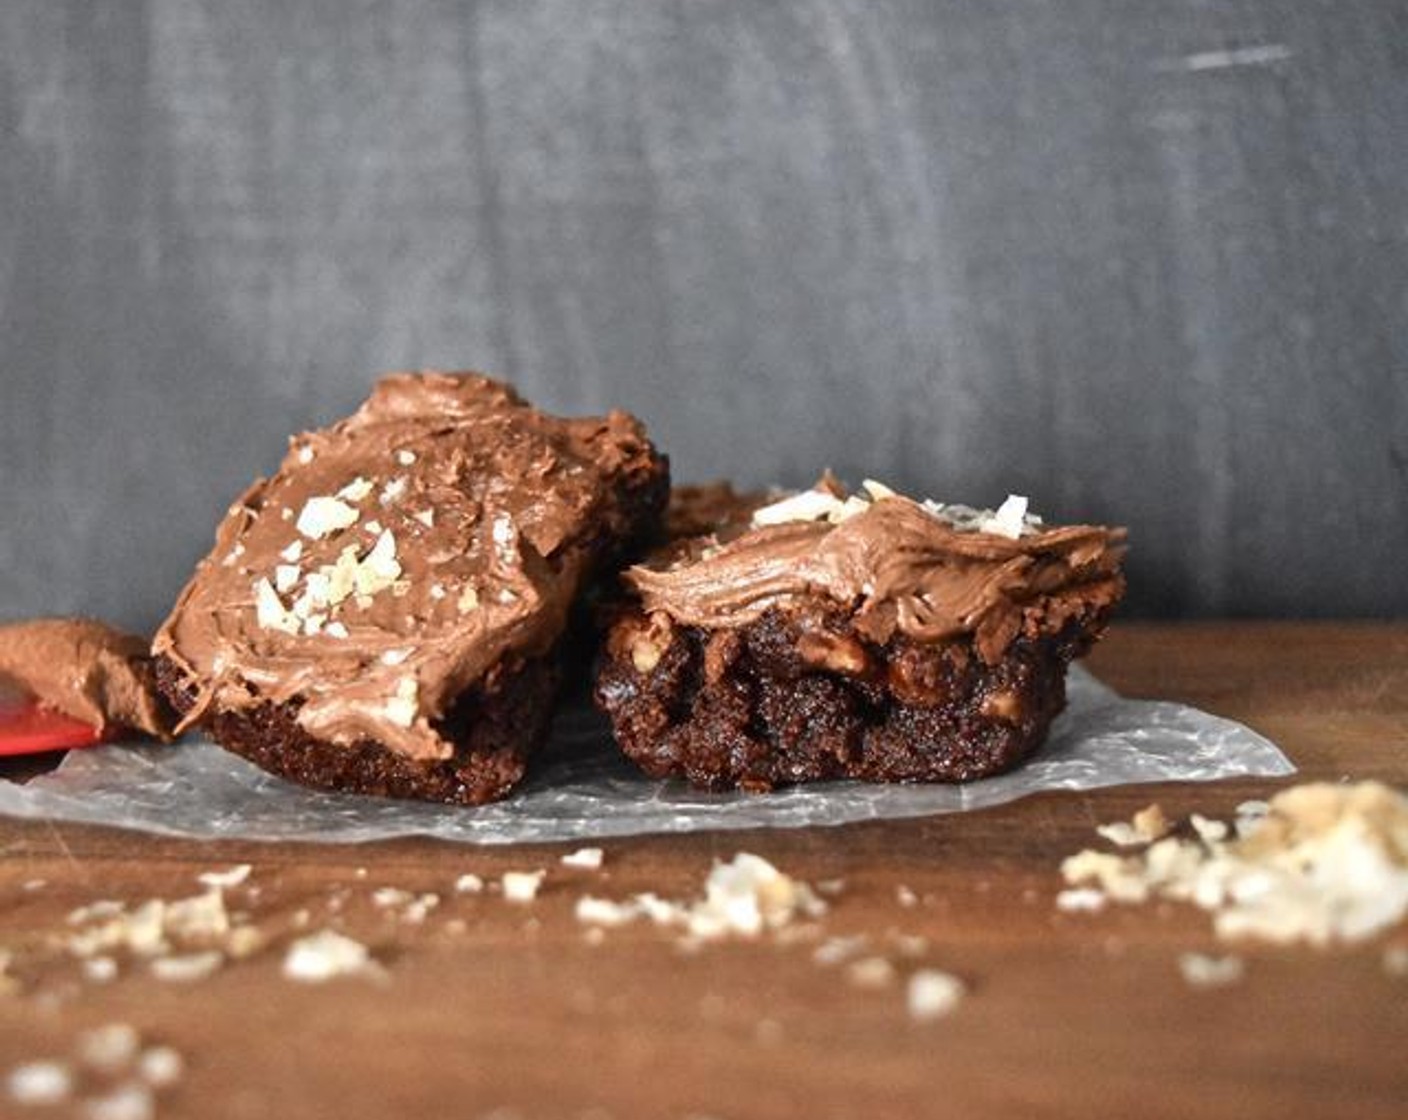 Smoked Salt Pecan Brownies with Buttermilk Frosting